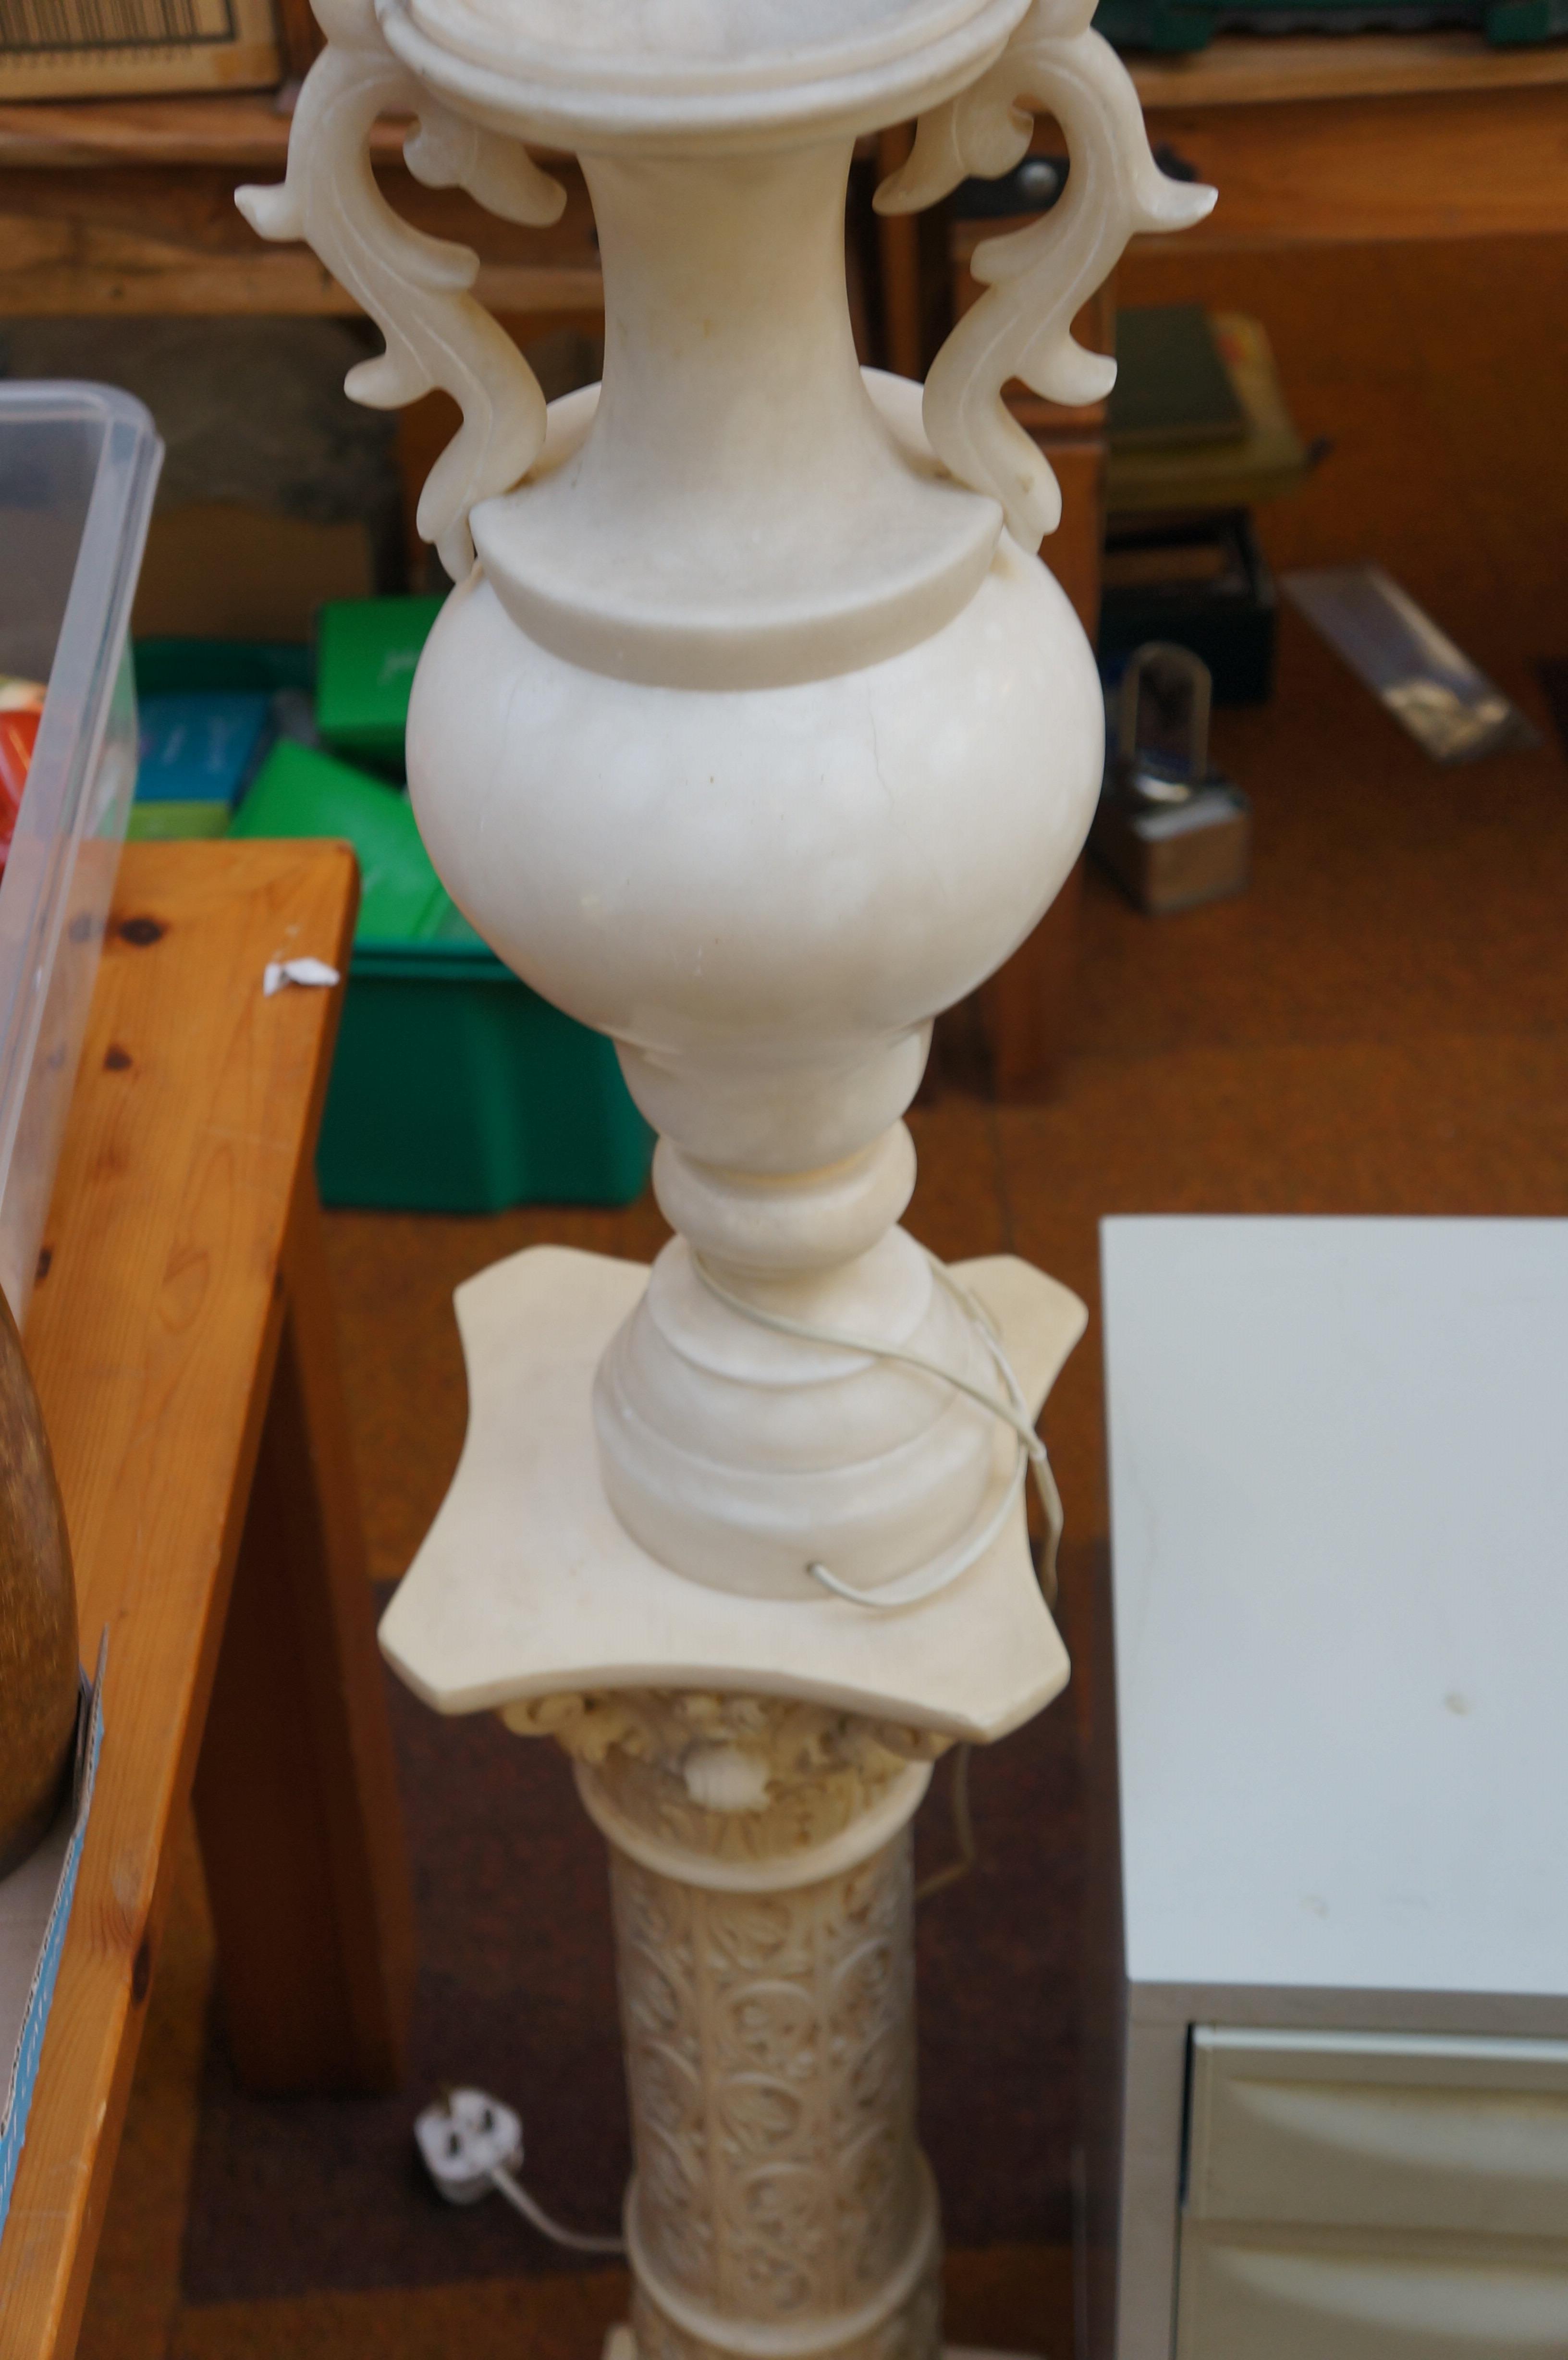 Italian marble lamp on resin stand (lamp A/F)